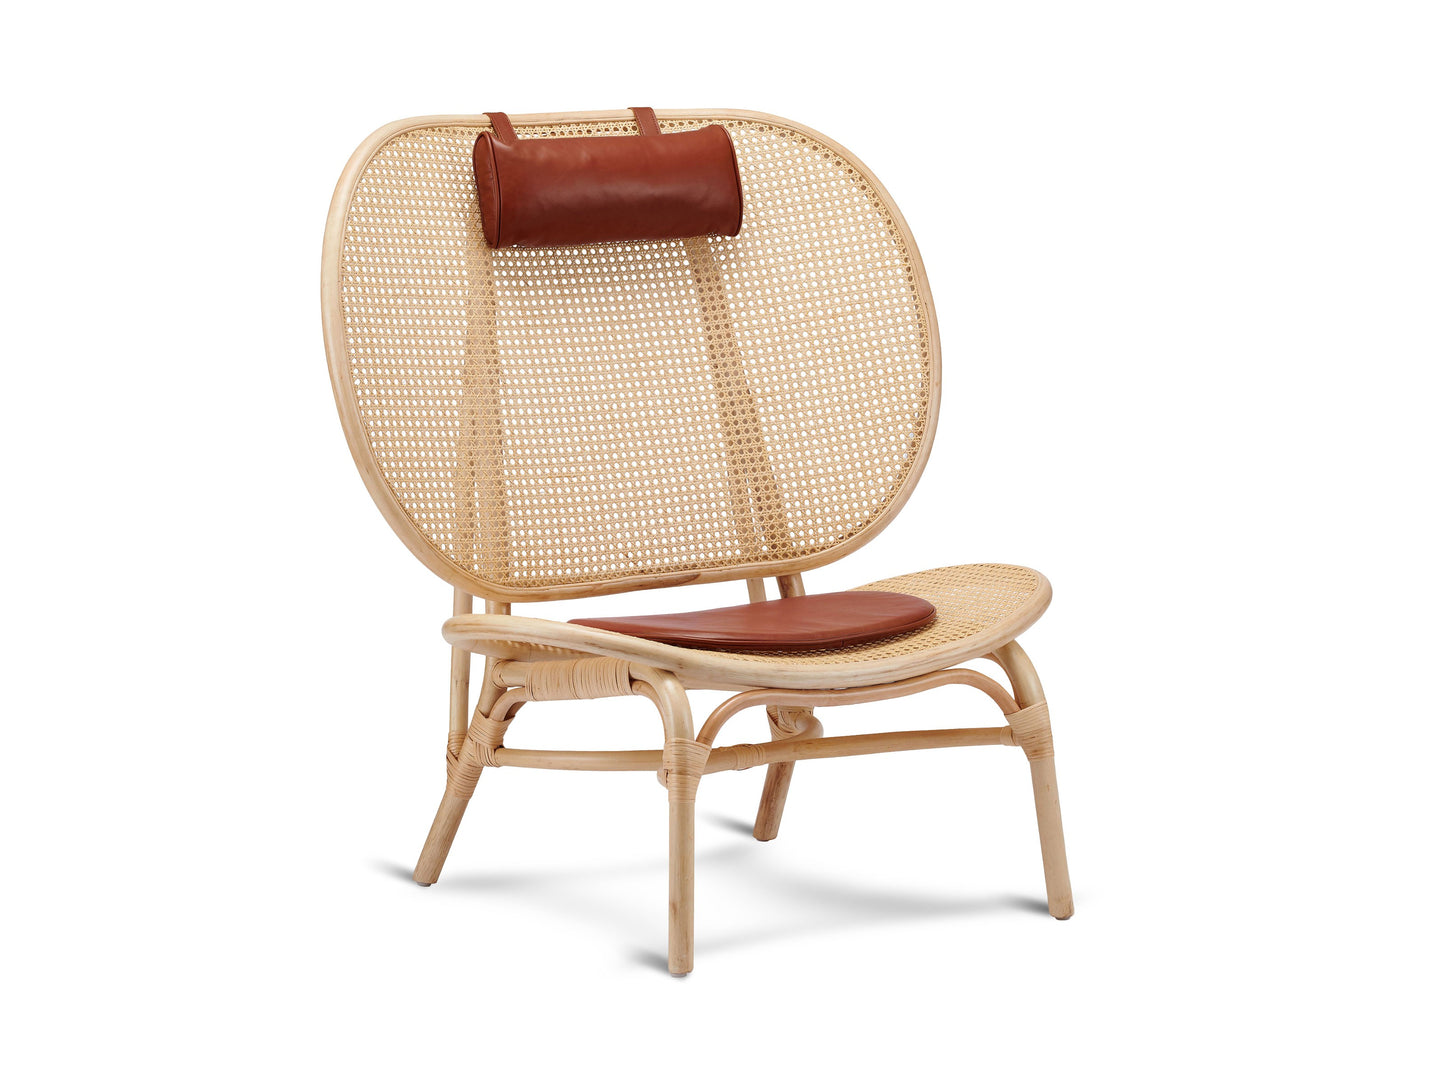 NORR11 NOMAD LOUNGE CHAIR $3,600.00